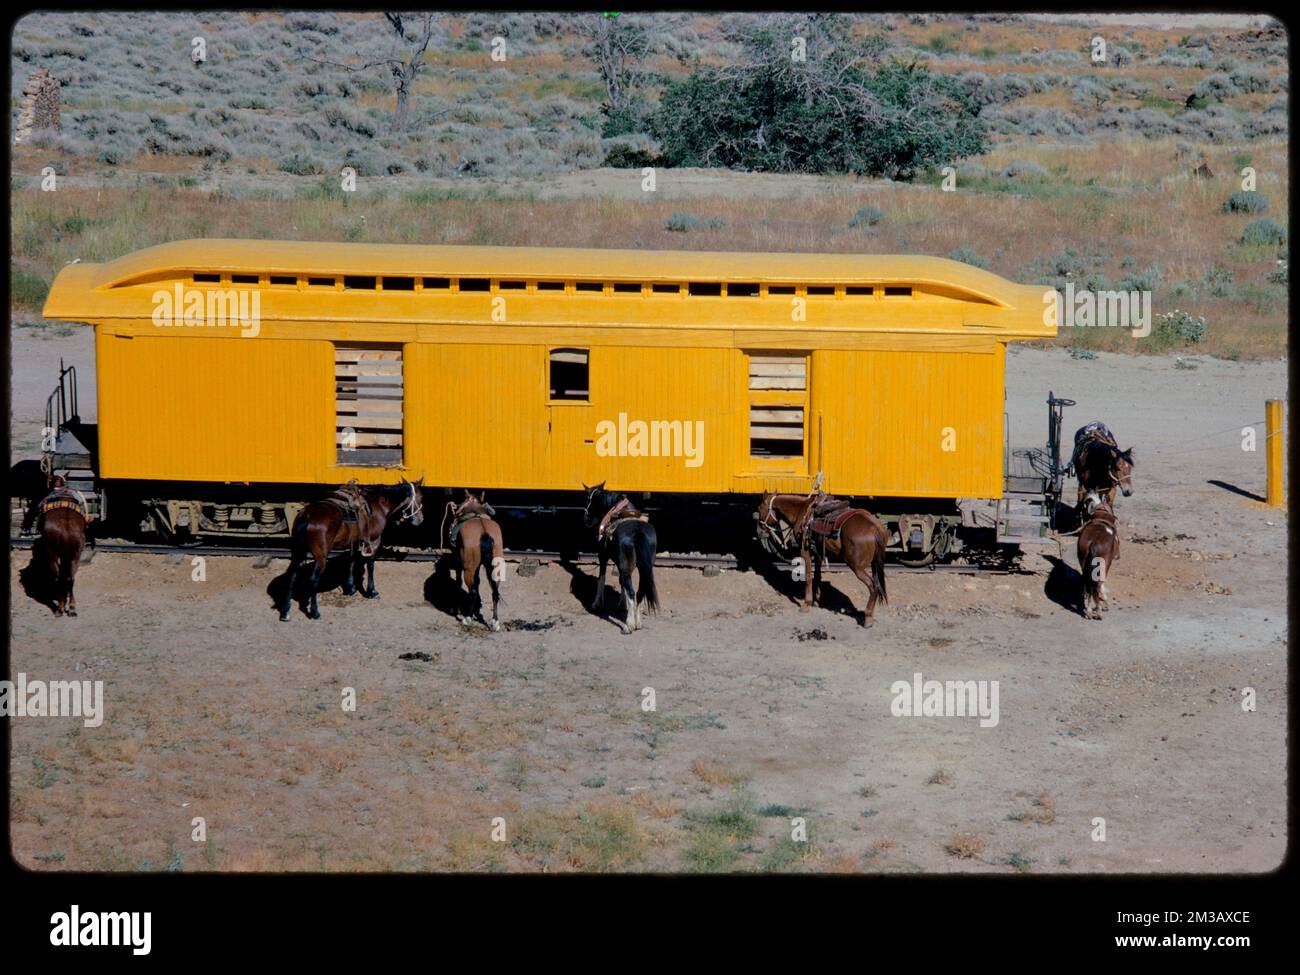 Horses standing next to yellow train car, likely Nevada , Horses, Railroad cars. Edmund L. Mitchell Collection Stock Photo